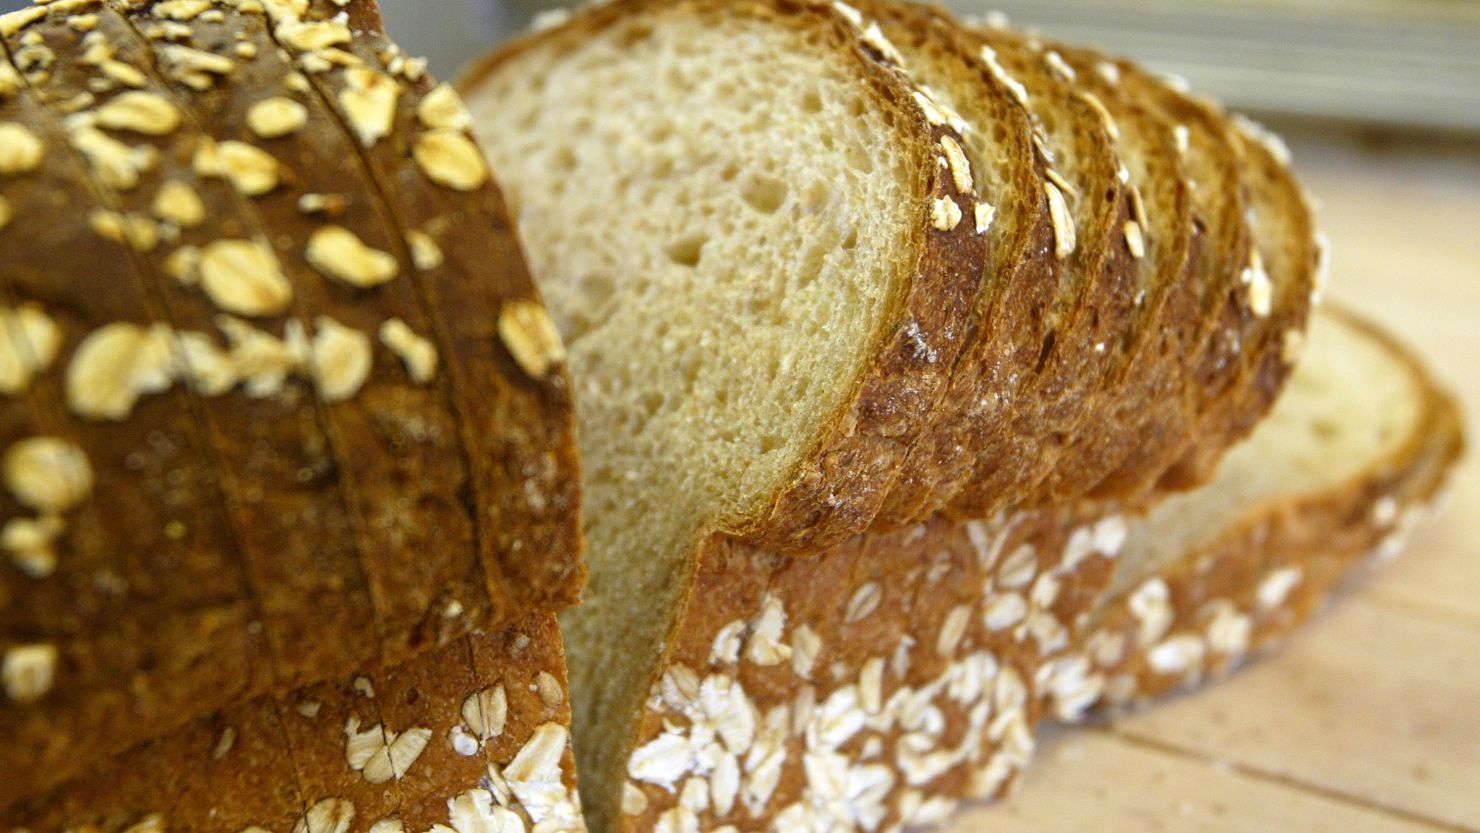 Gluten is a protein complex found in grains such as wheat, barley and rye. 